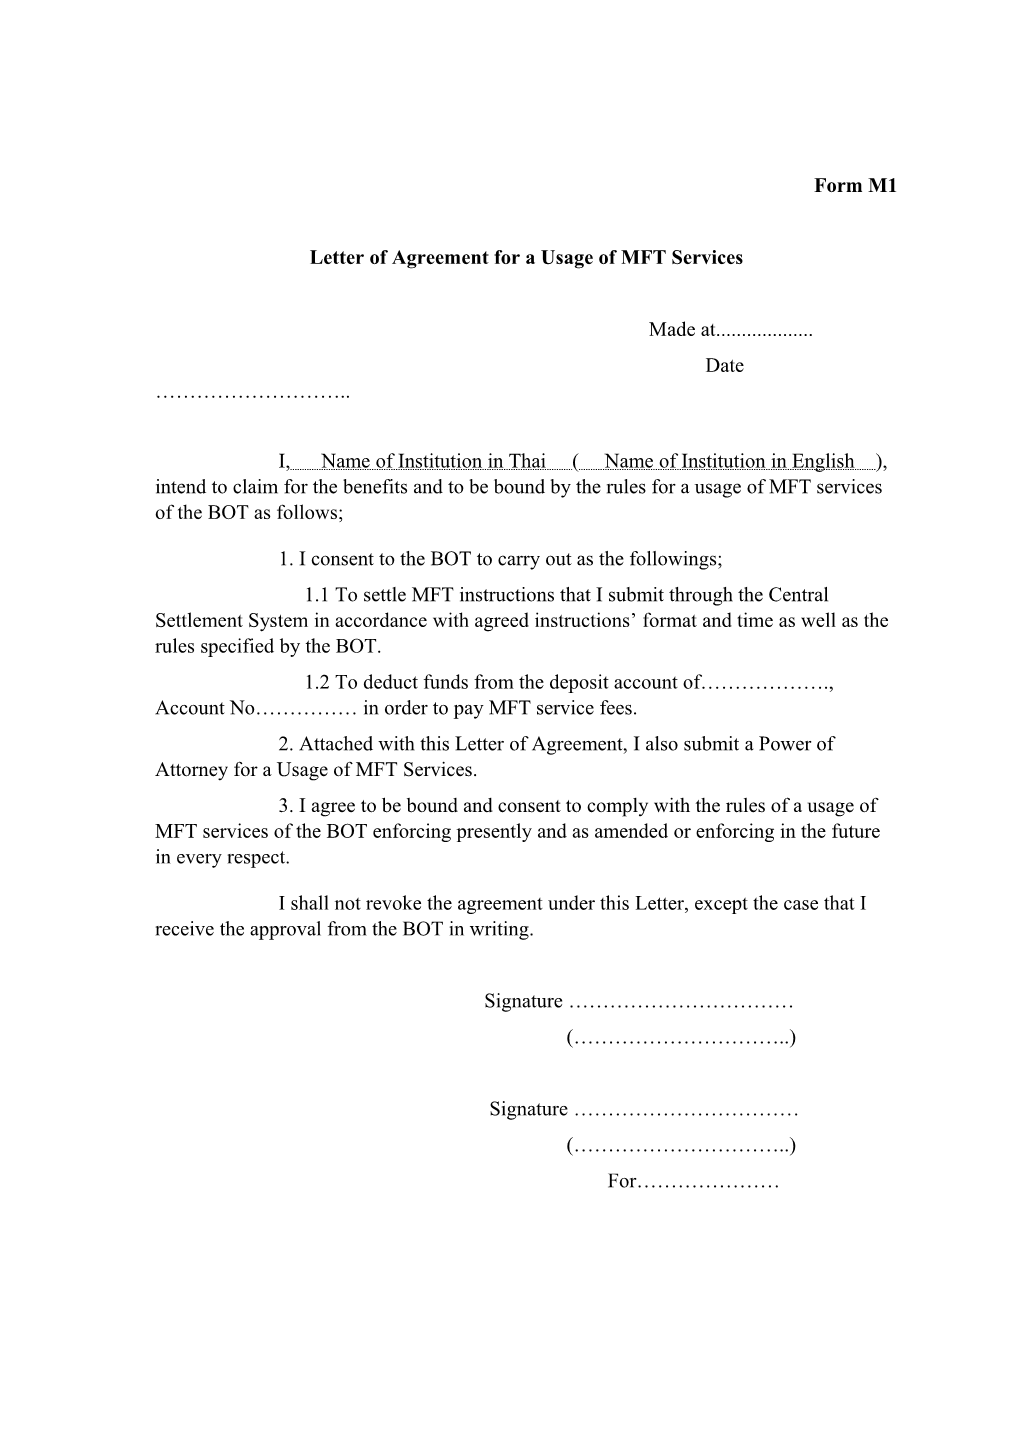 Letter of Agreement for a Usage of MFT Services